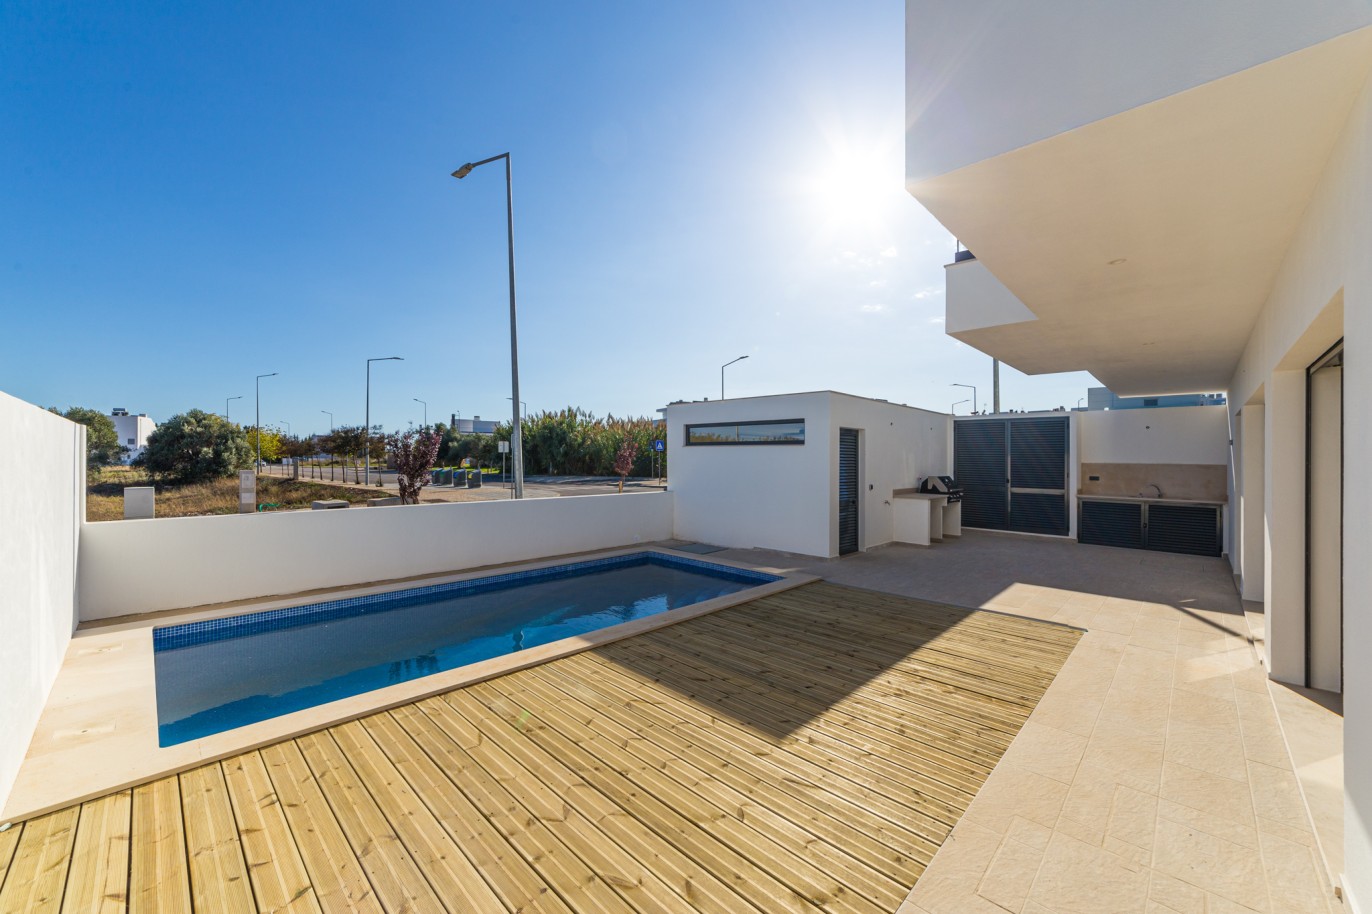 3 bedroom villa with pool and sea view, for sale in Tavira, Algarve_225847